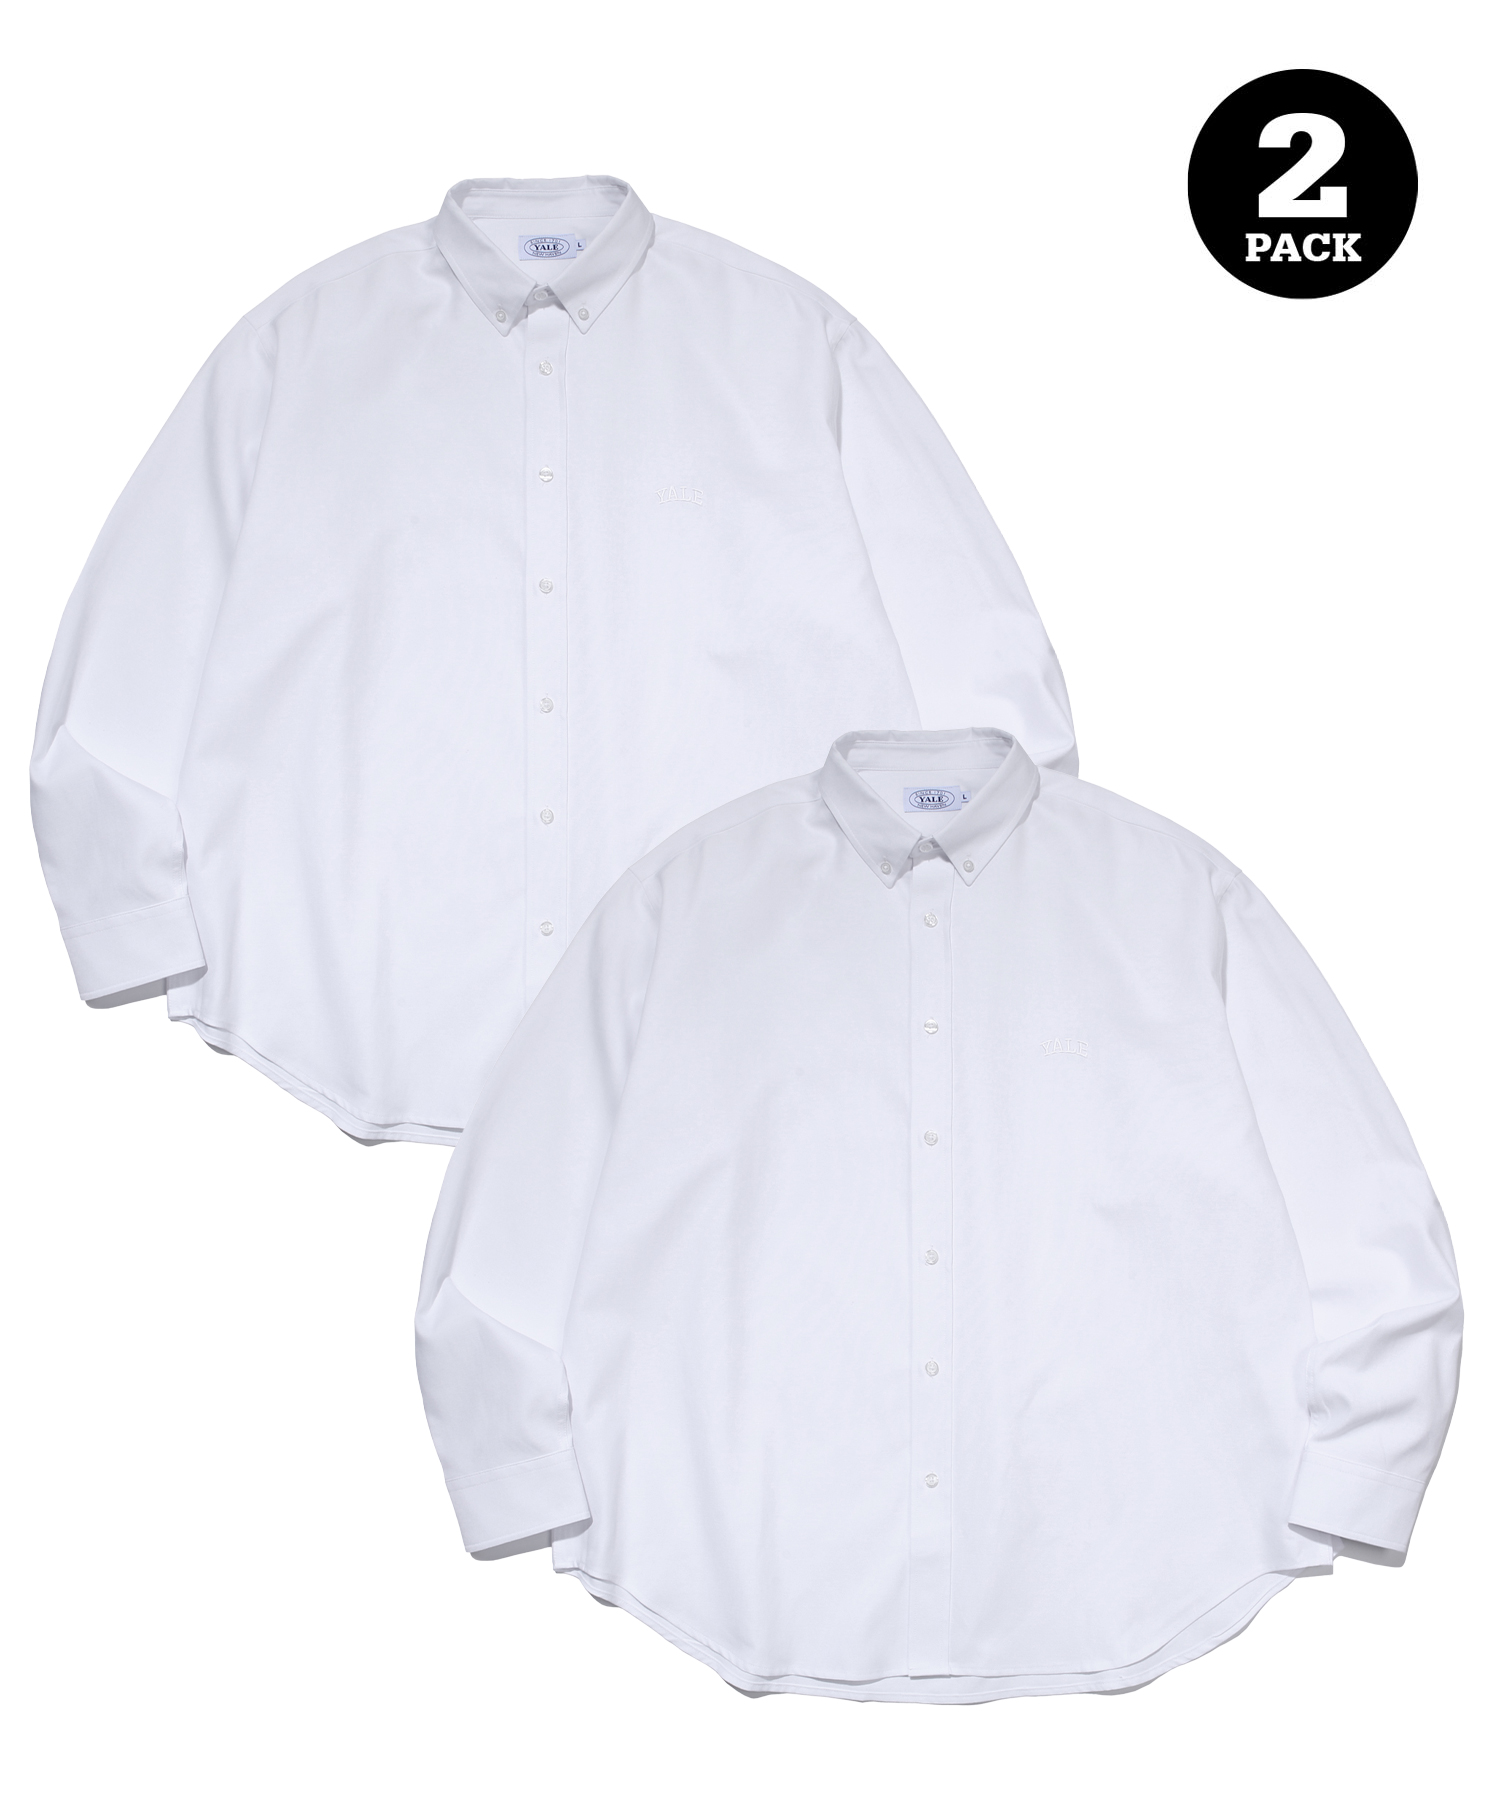 (24SS) [ONEMILE WEAR] 2PACK OXFORD BIG SHIRT WHITE / PINK